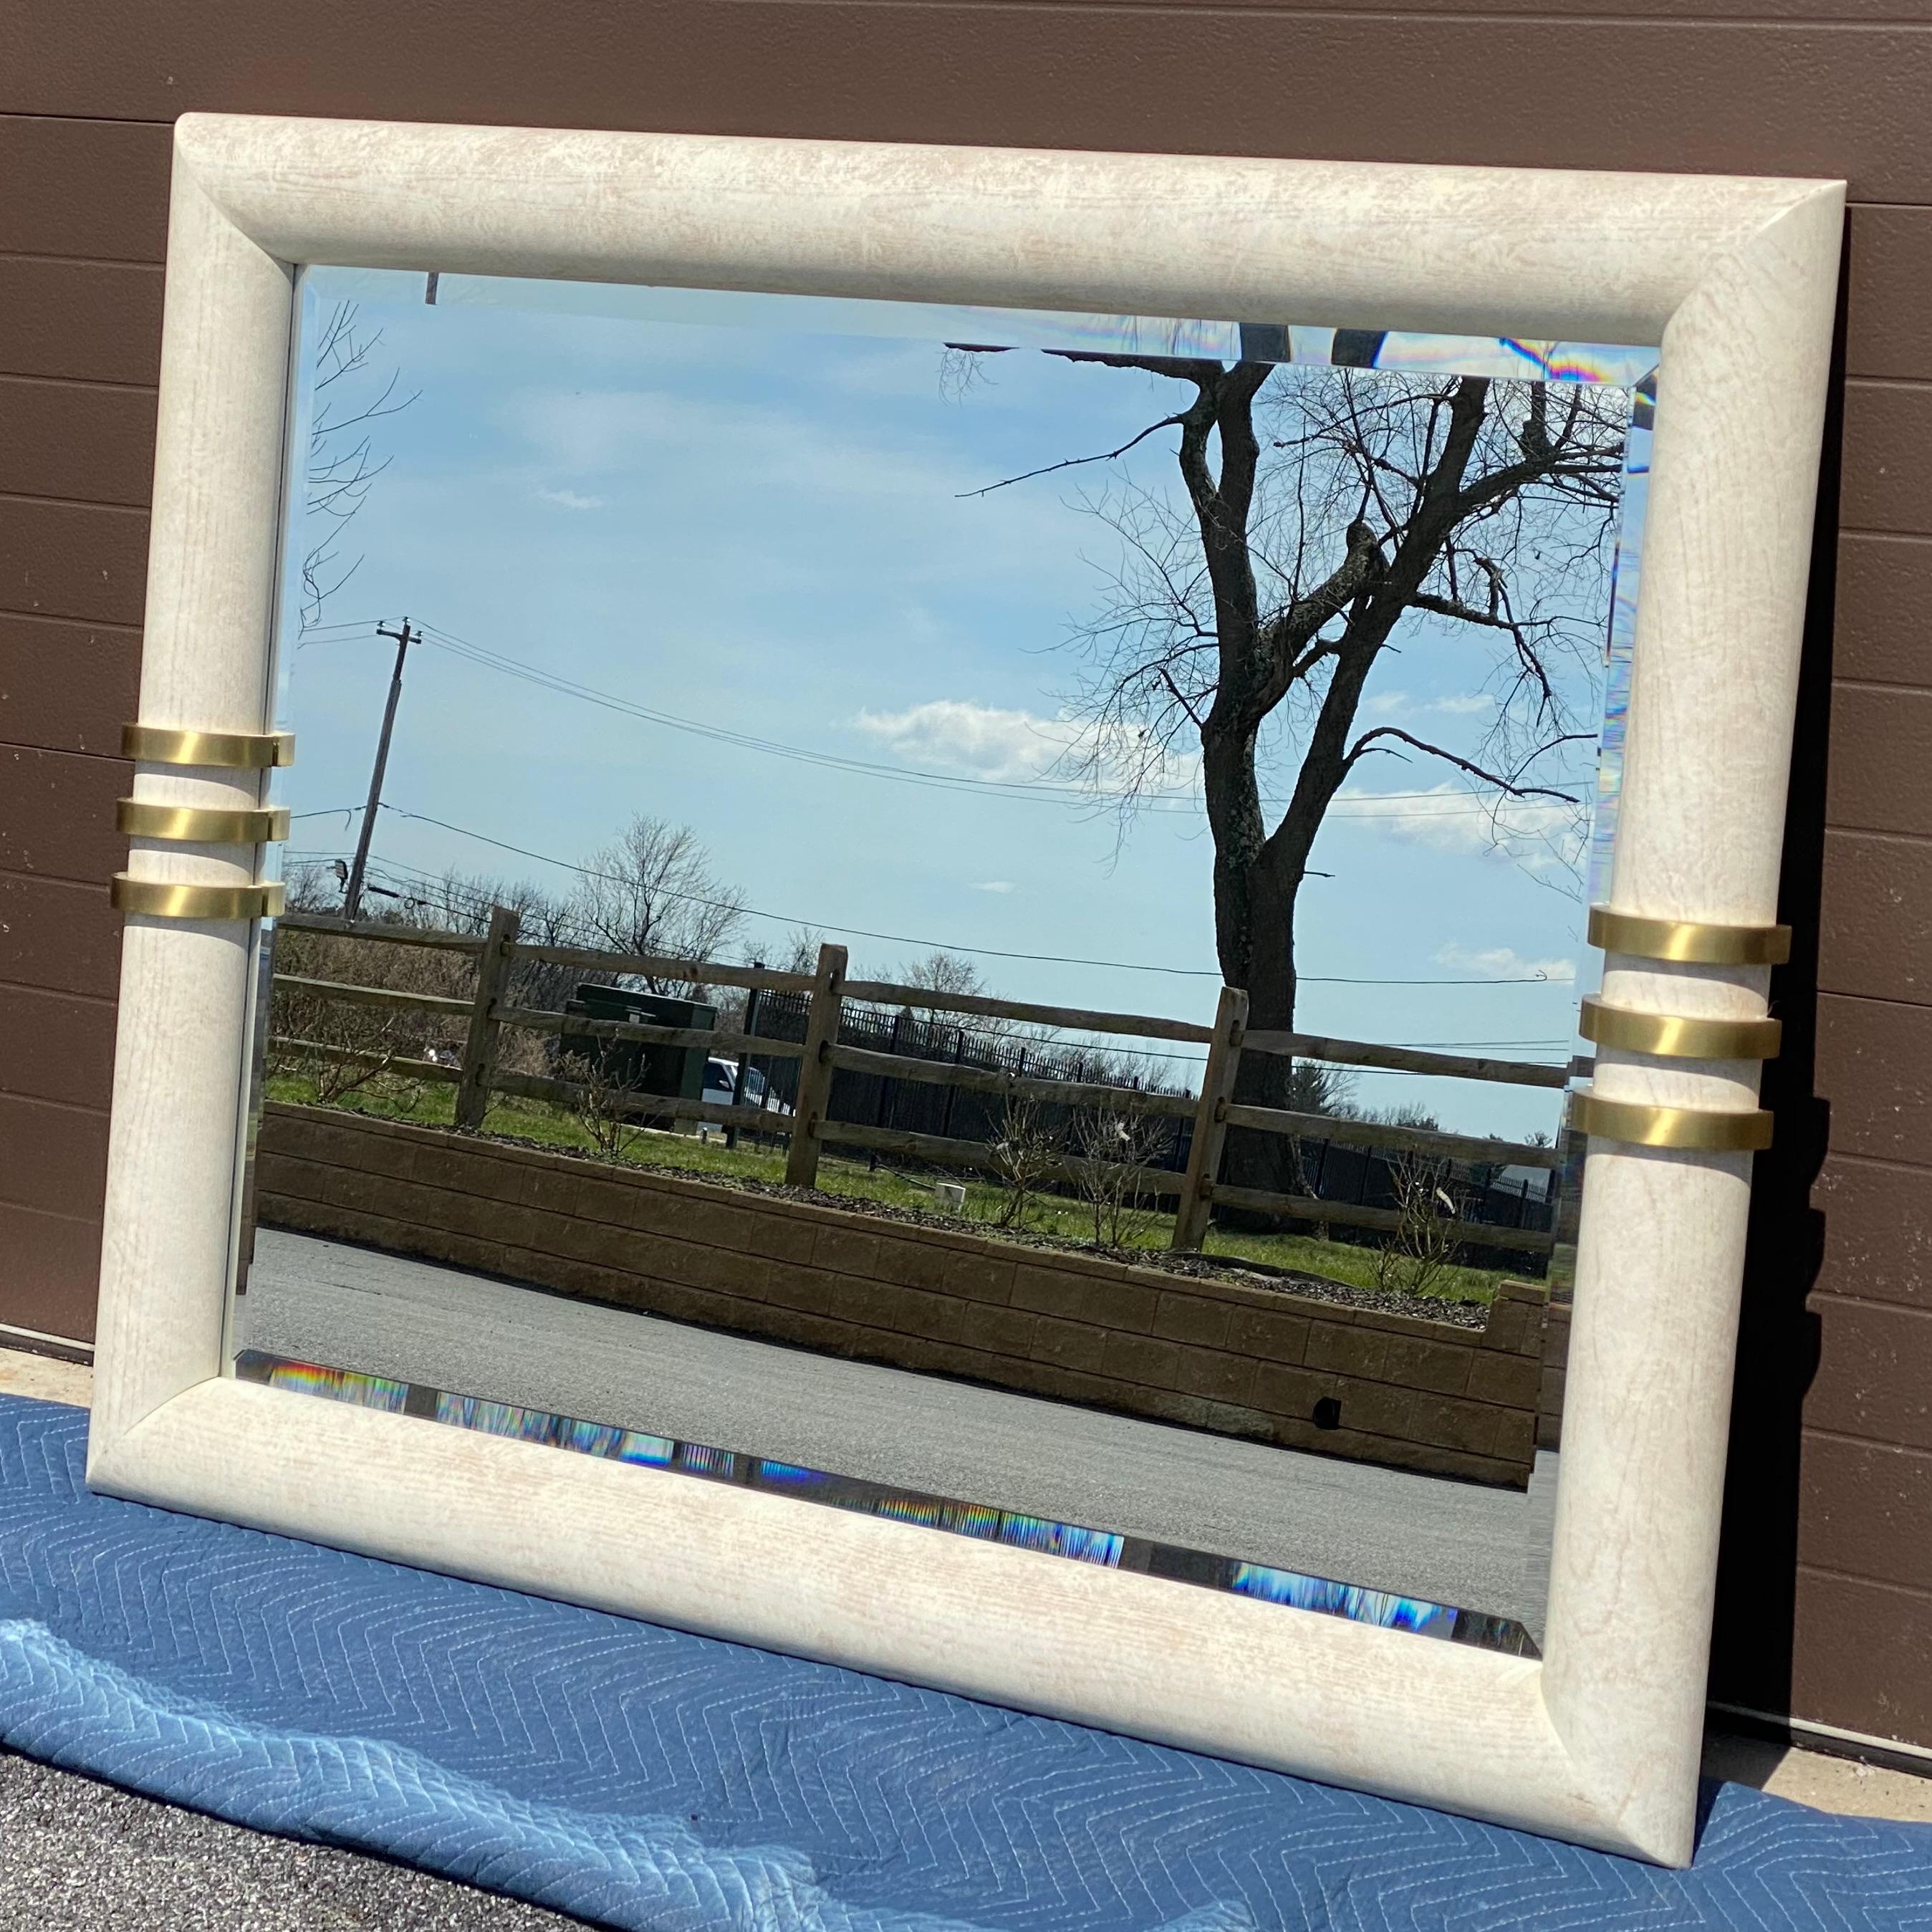 An epic modernist wall mirror featuring an cerused oak bullnose frame with brass details and beveled glass. Mirror view 46”w 35”h.
Could also be used vertically.